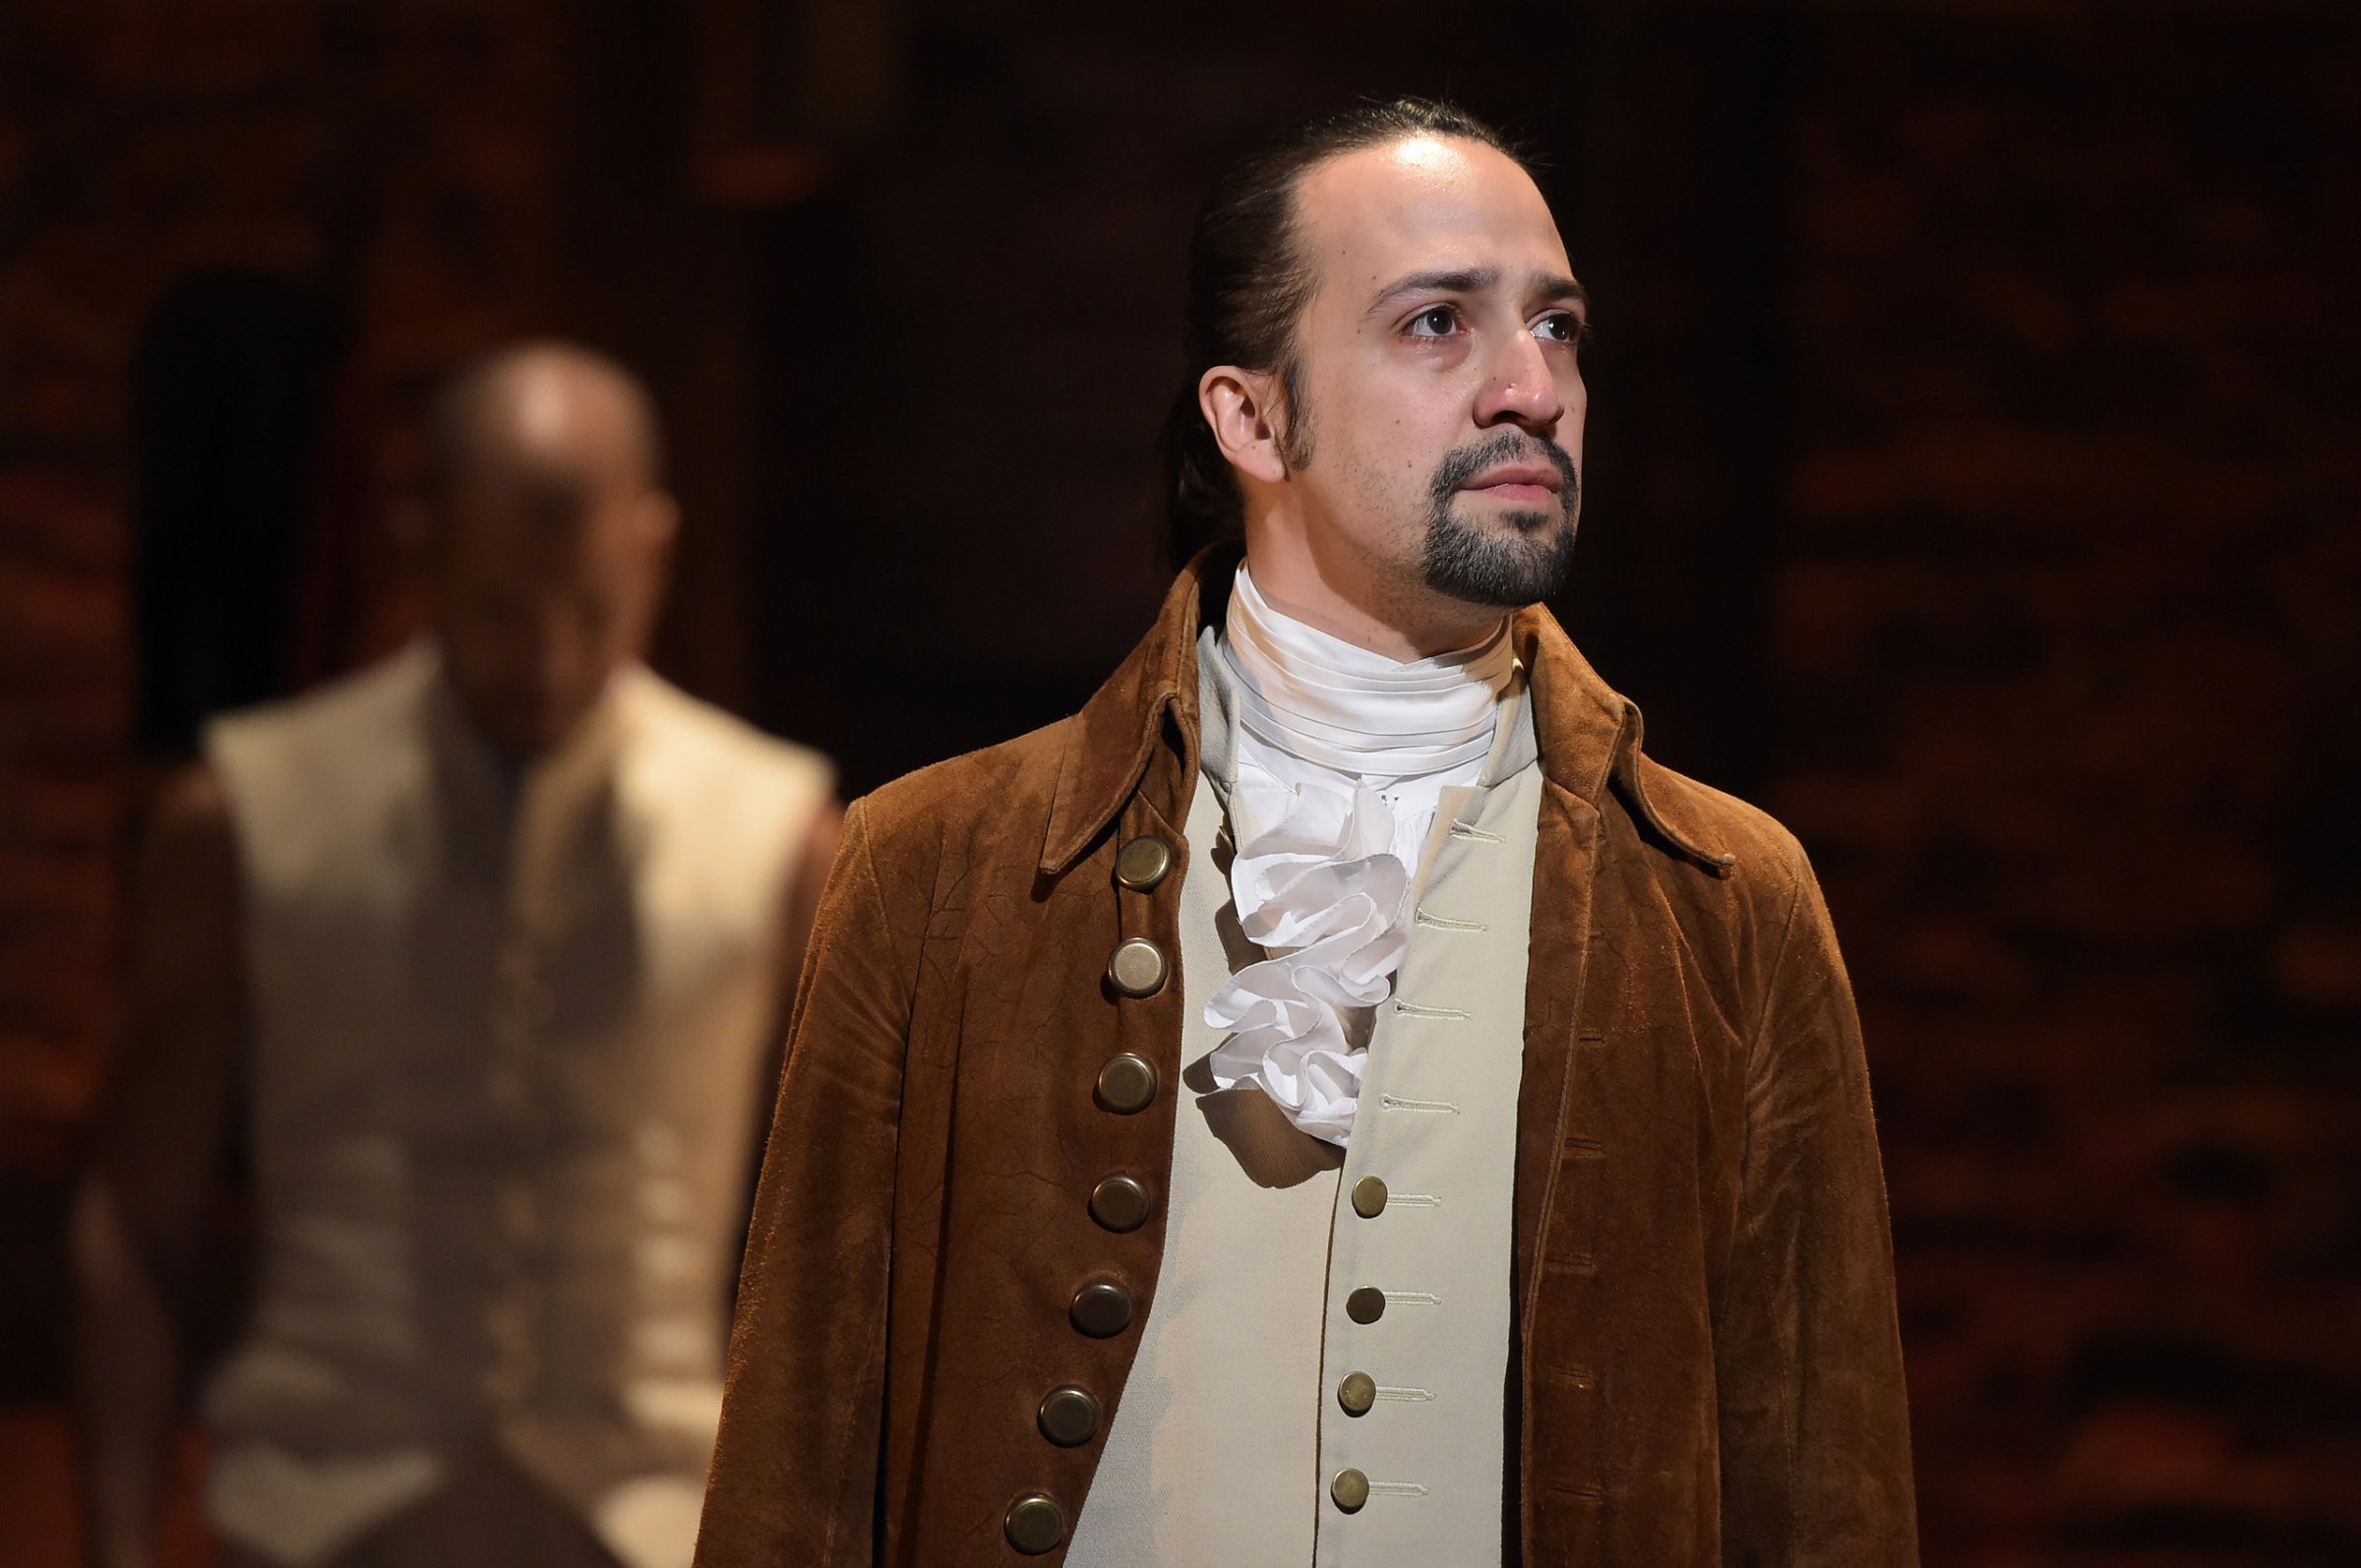 Actor, composer Lin-Manuel Miranda is seen on stage during the "Hamilton" performance for the 58th GRAMMY Awards in New York on Feb. 15, 2016.